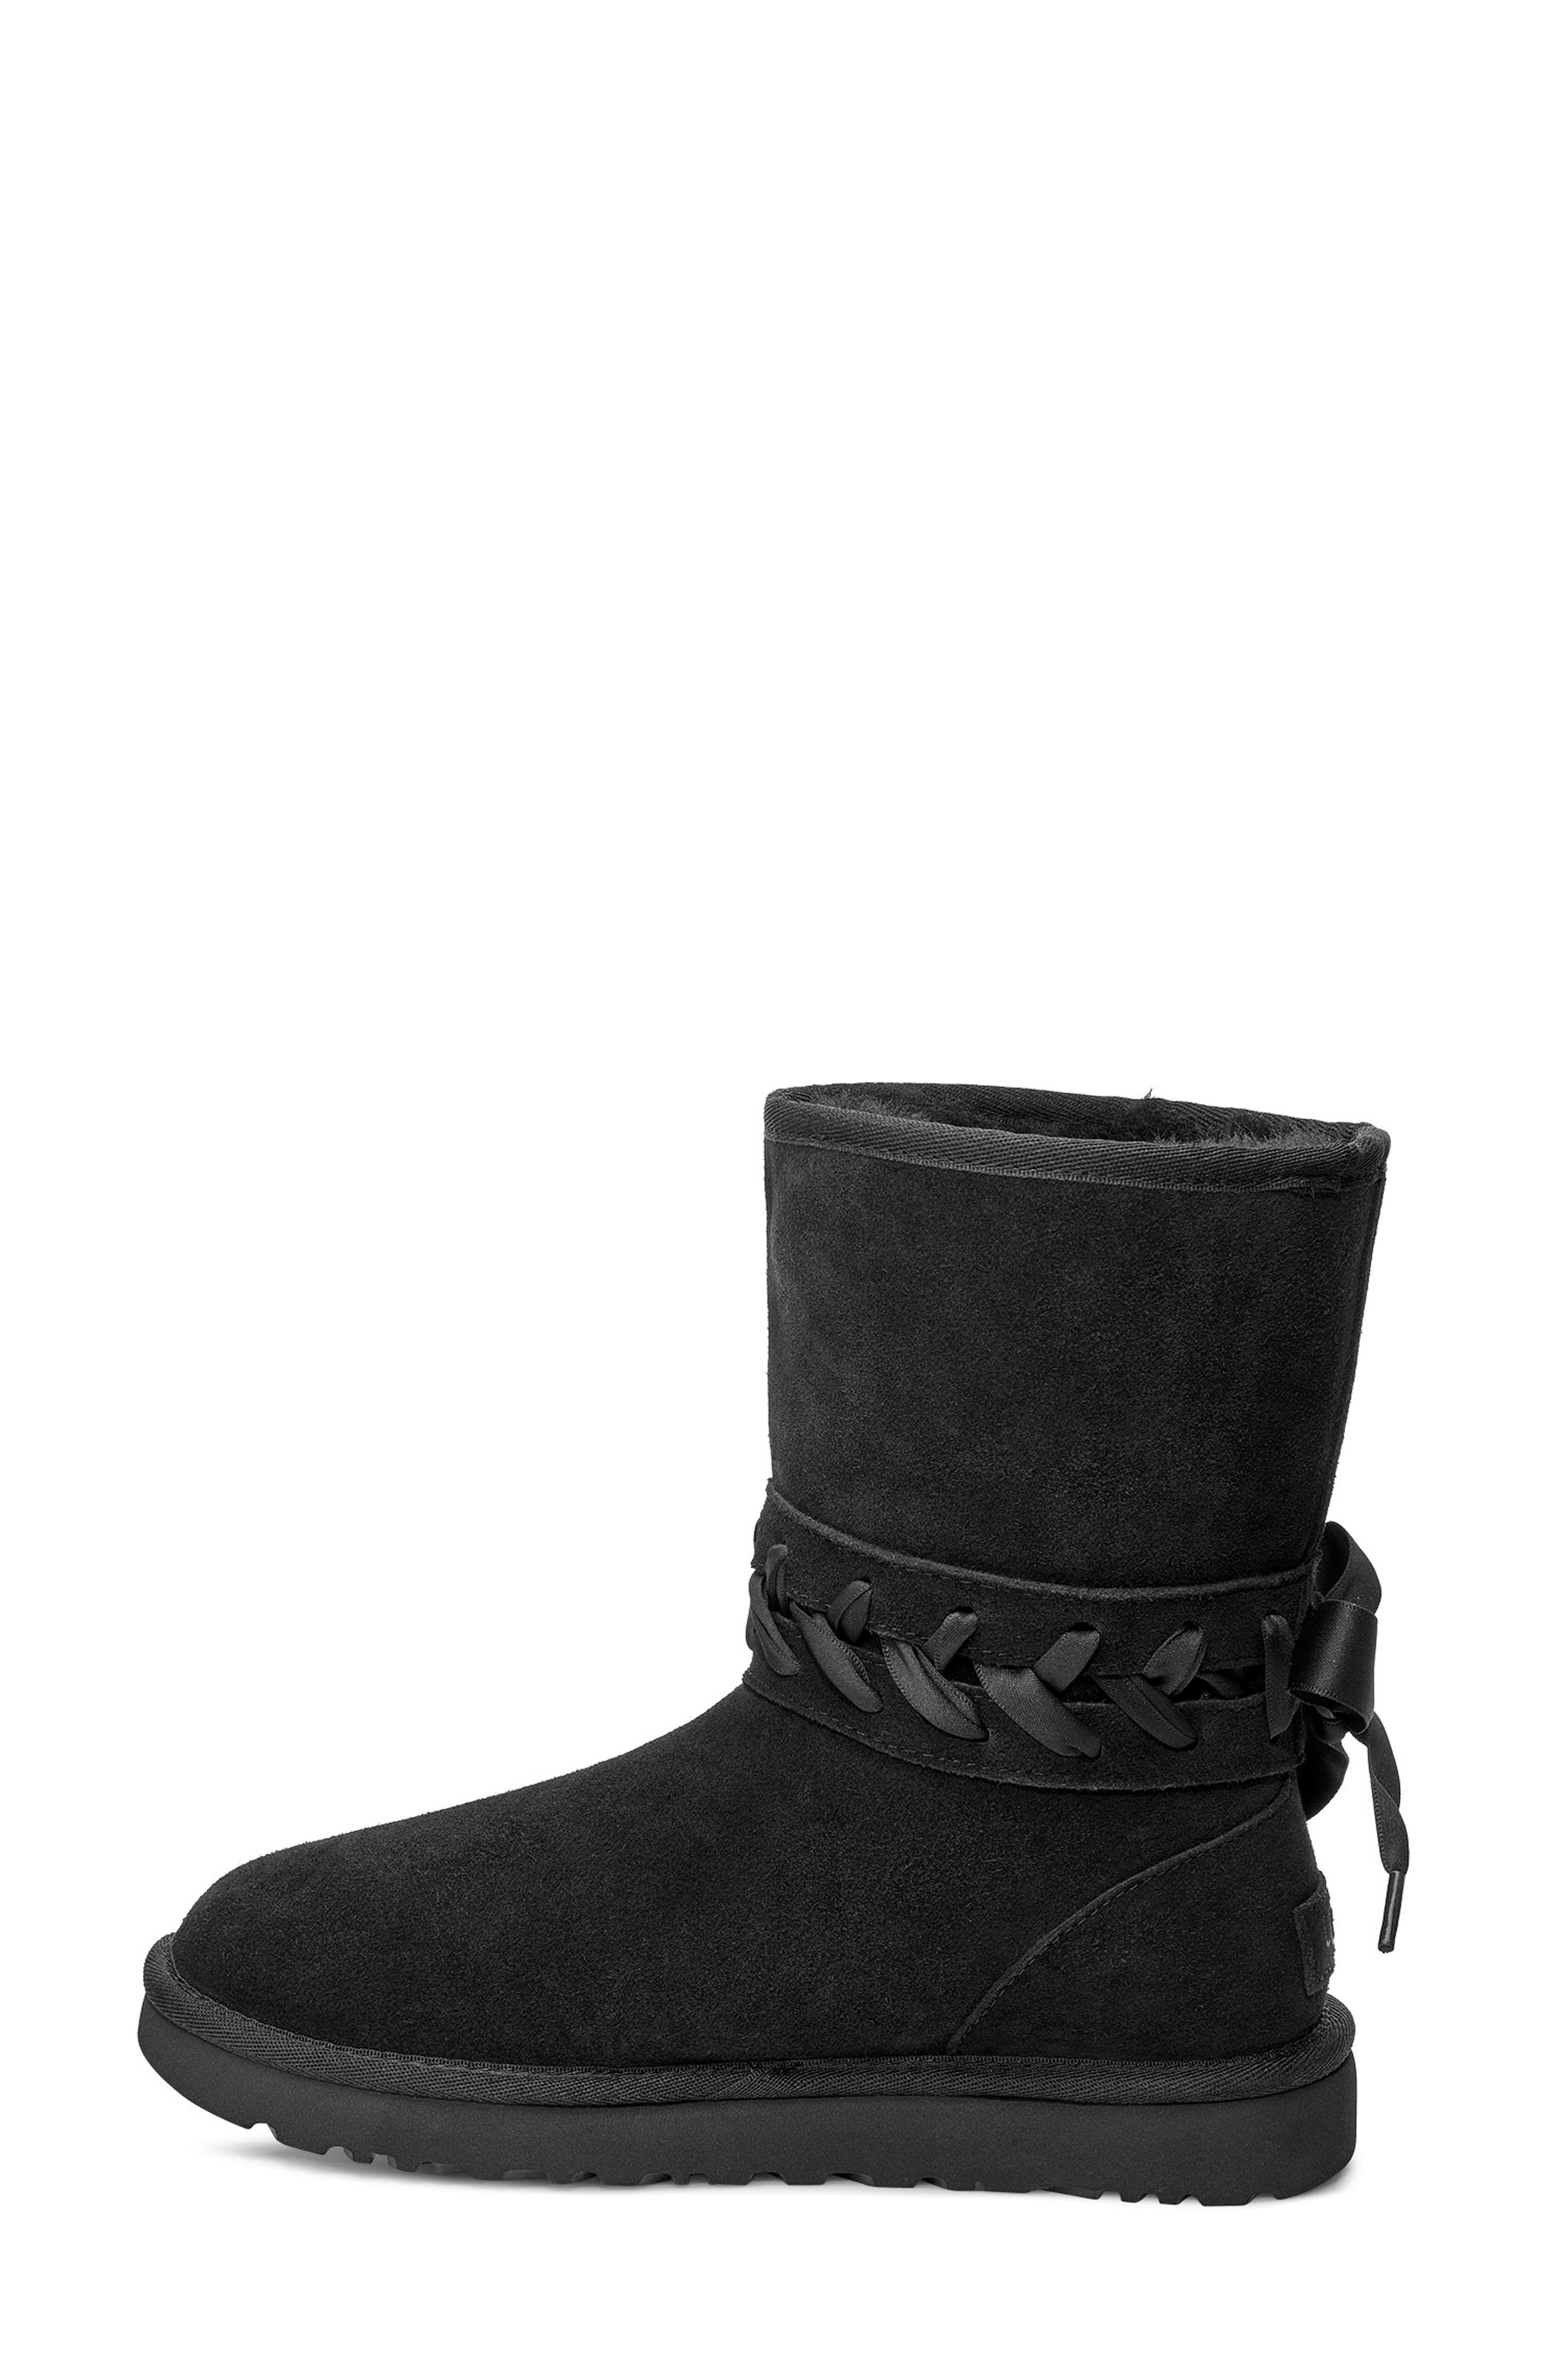 classic genuine shearling lined short waterproof boot